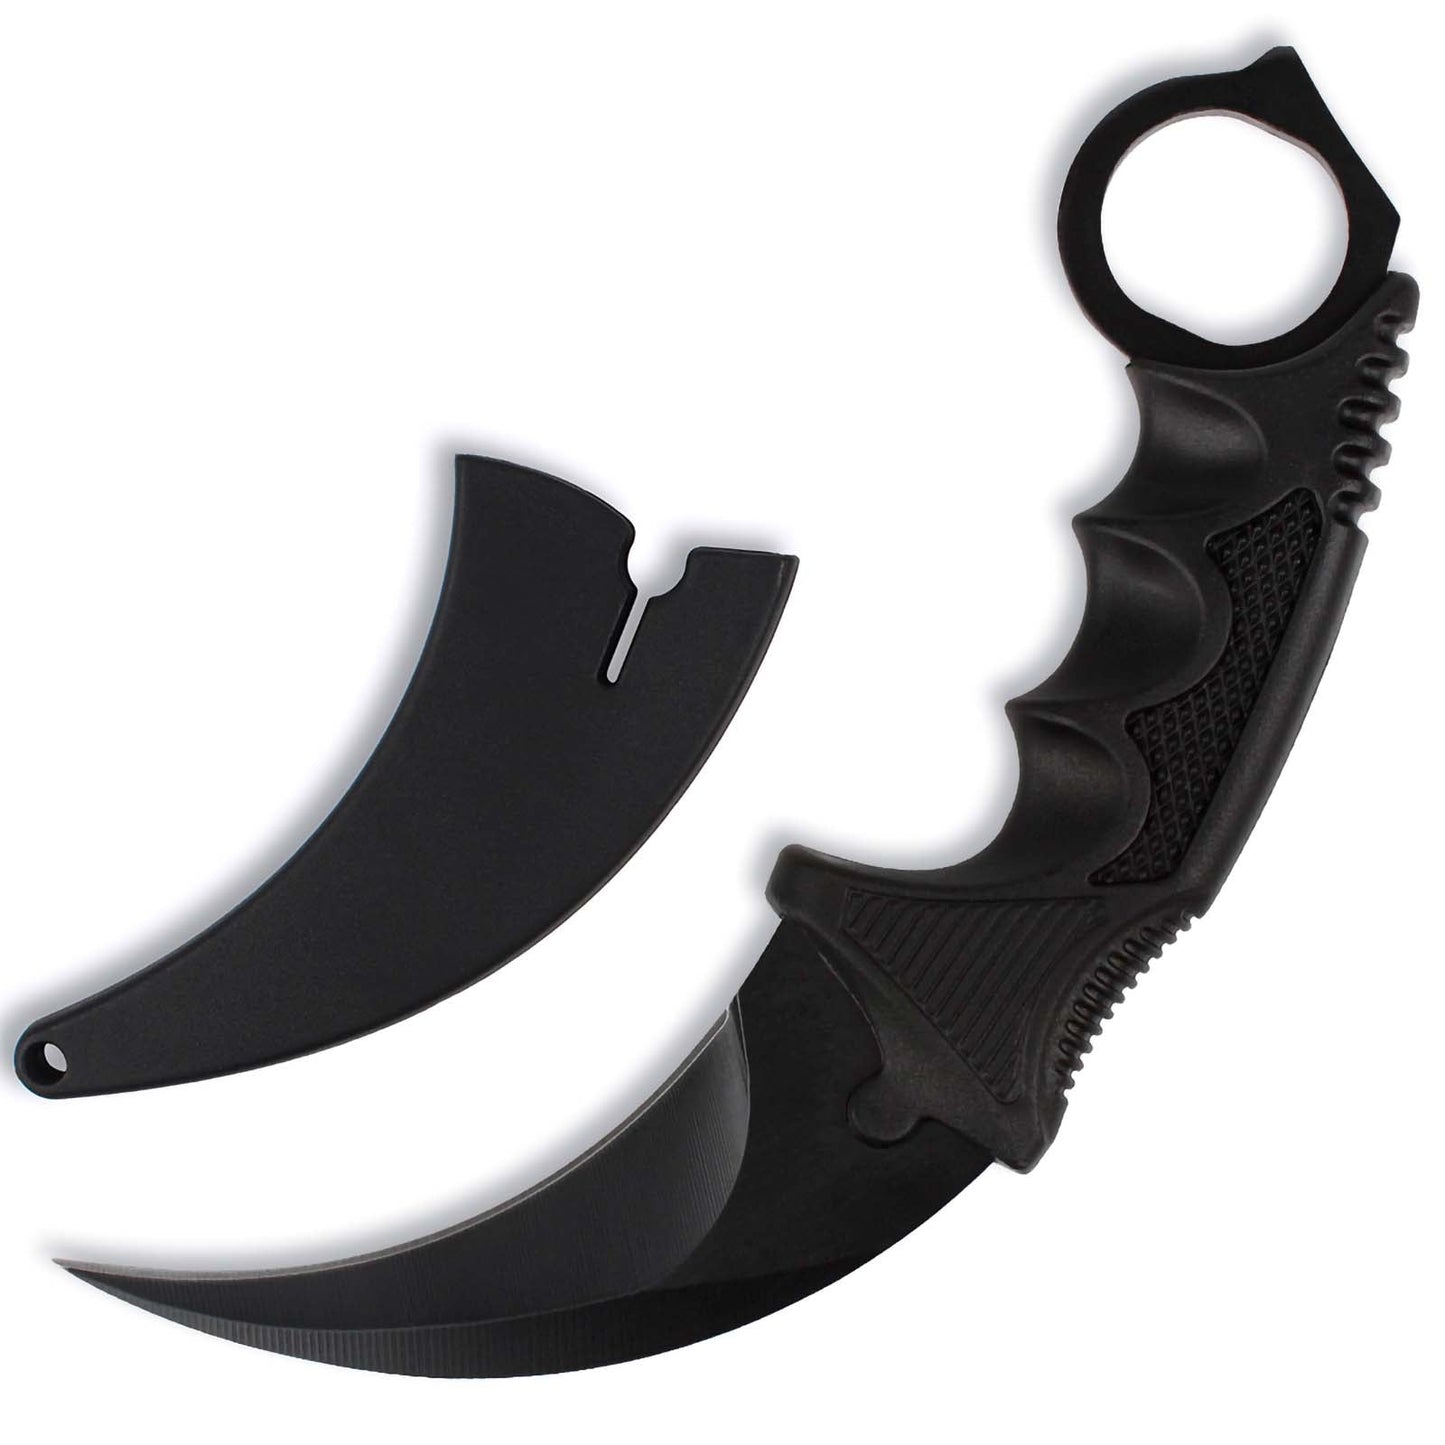 Andux Karambit Knife Tool CS/ZD-01 Black (ONLY Available in the United States)